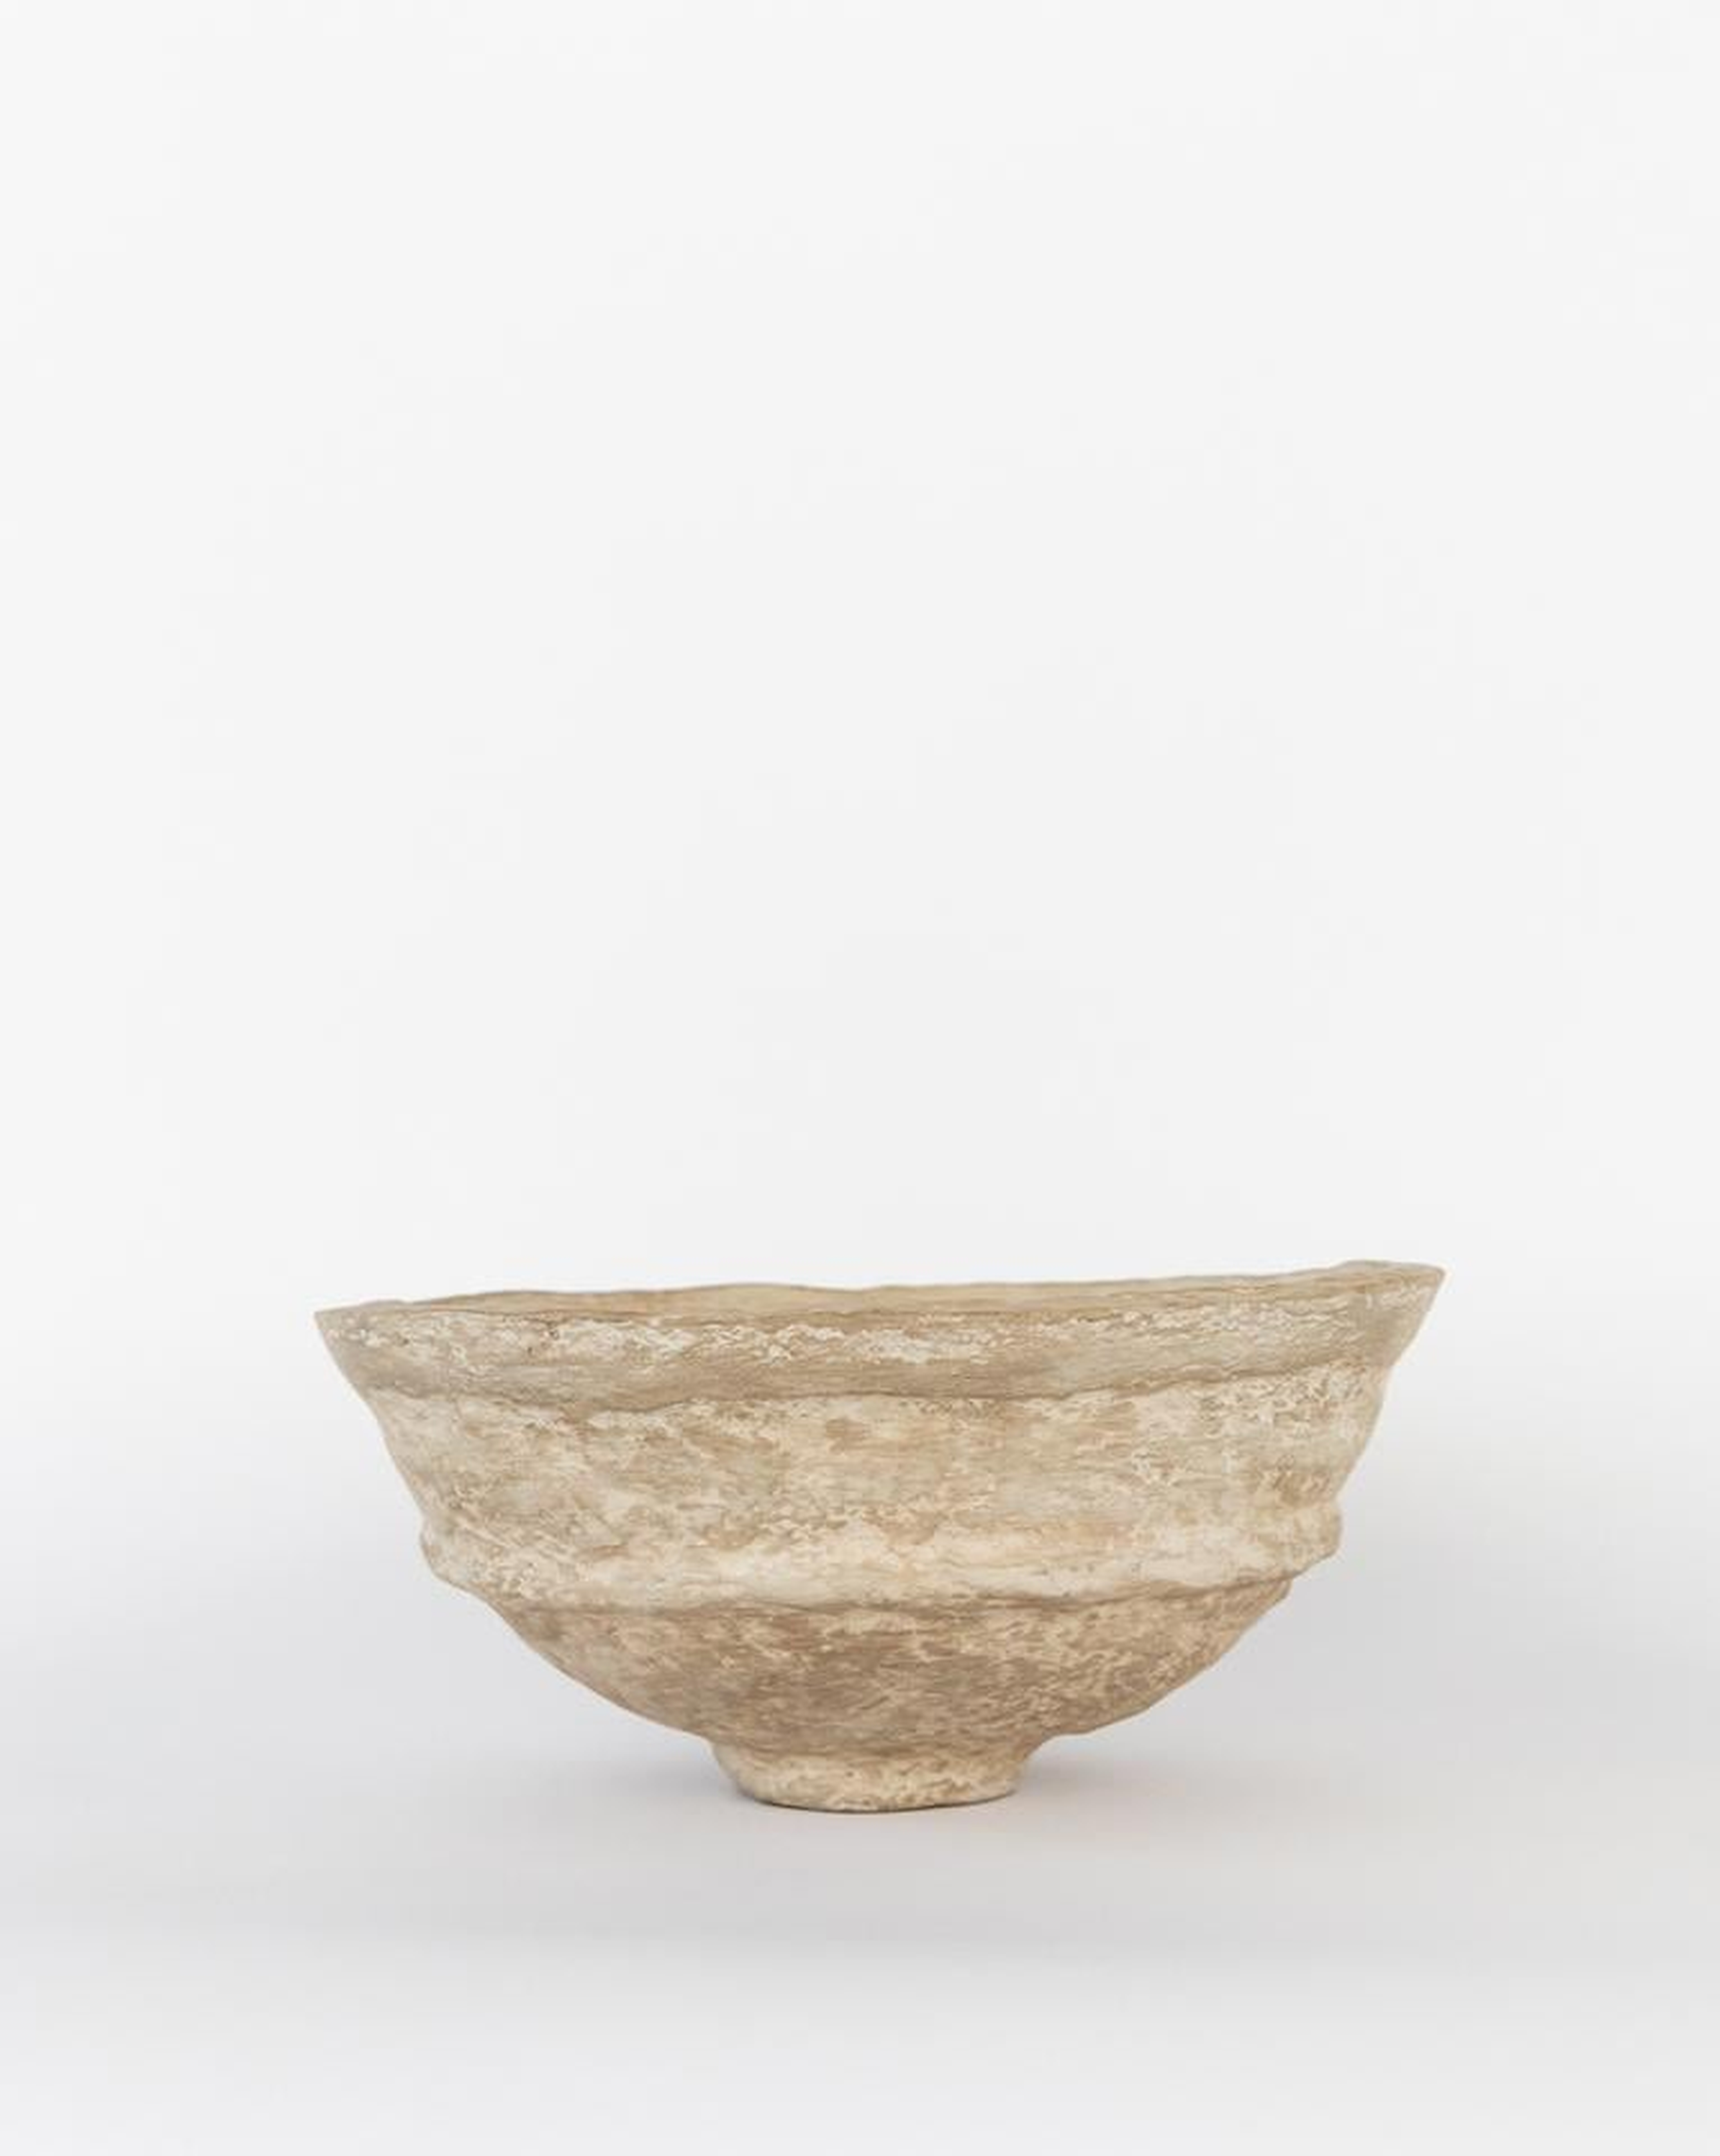 PAPER MACHE CRAFTED BOWL- small - McGee & Co.